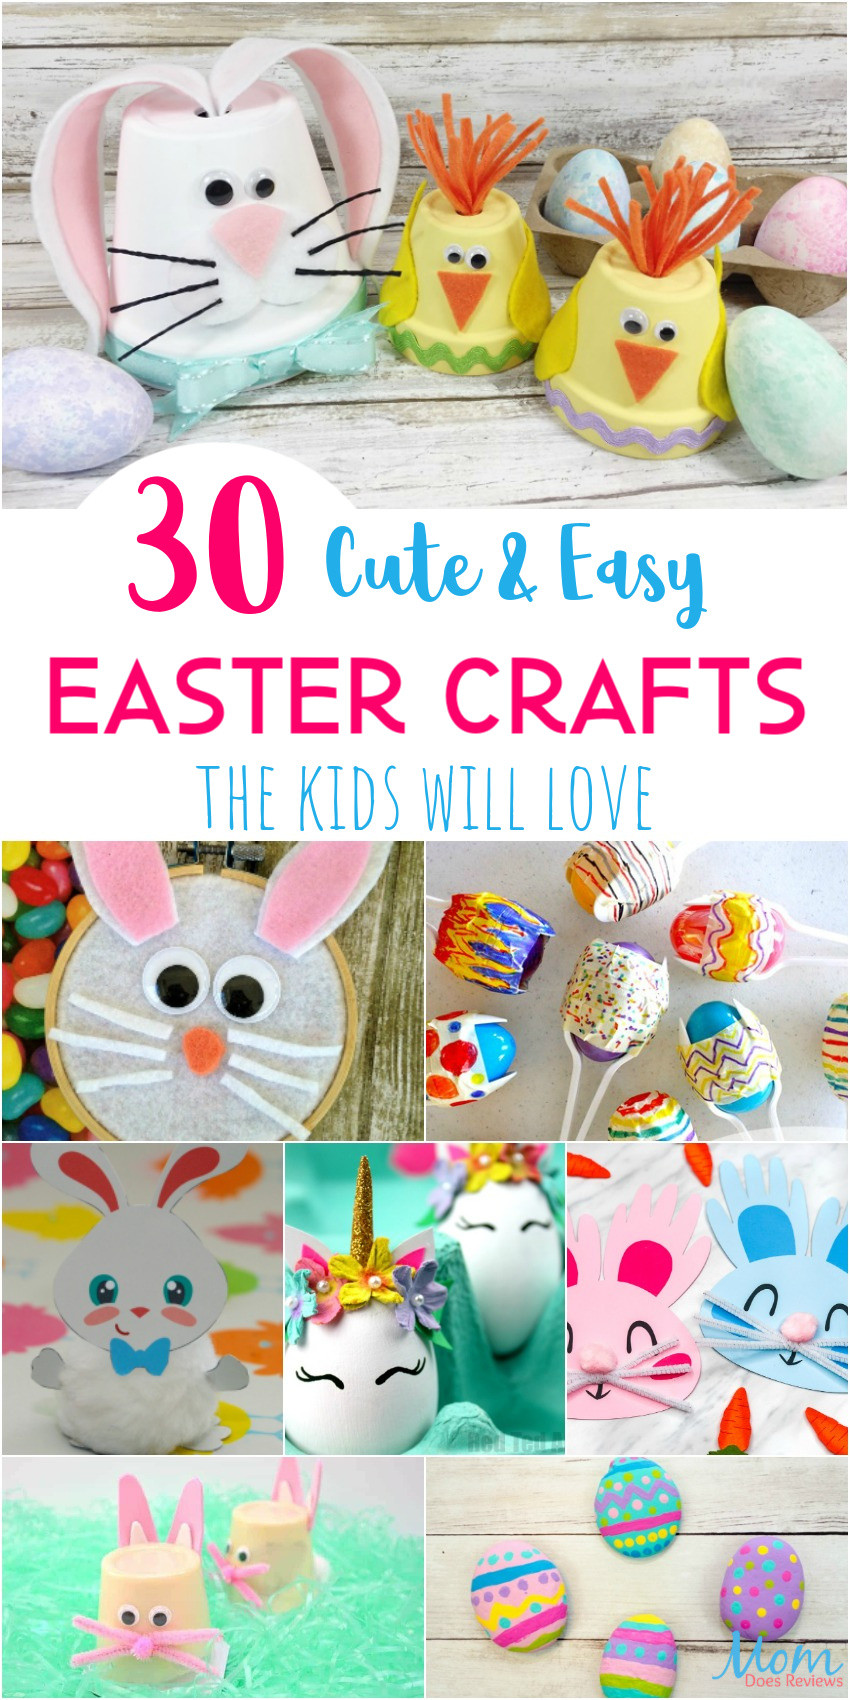 Fun Easter Crafts
 30 Cute & Easy Easter Crafts the Kids will Love Mom Does